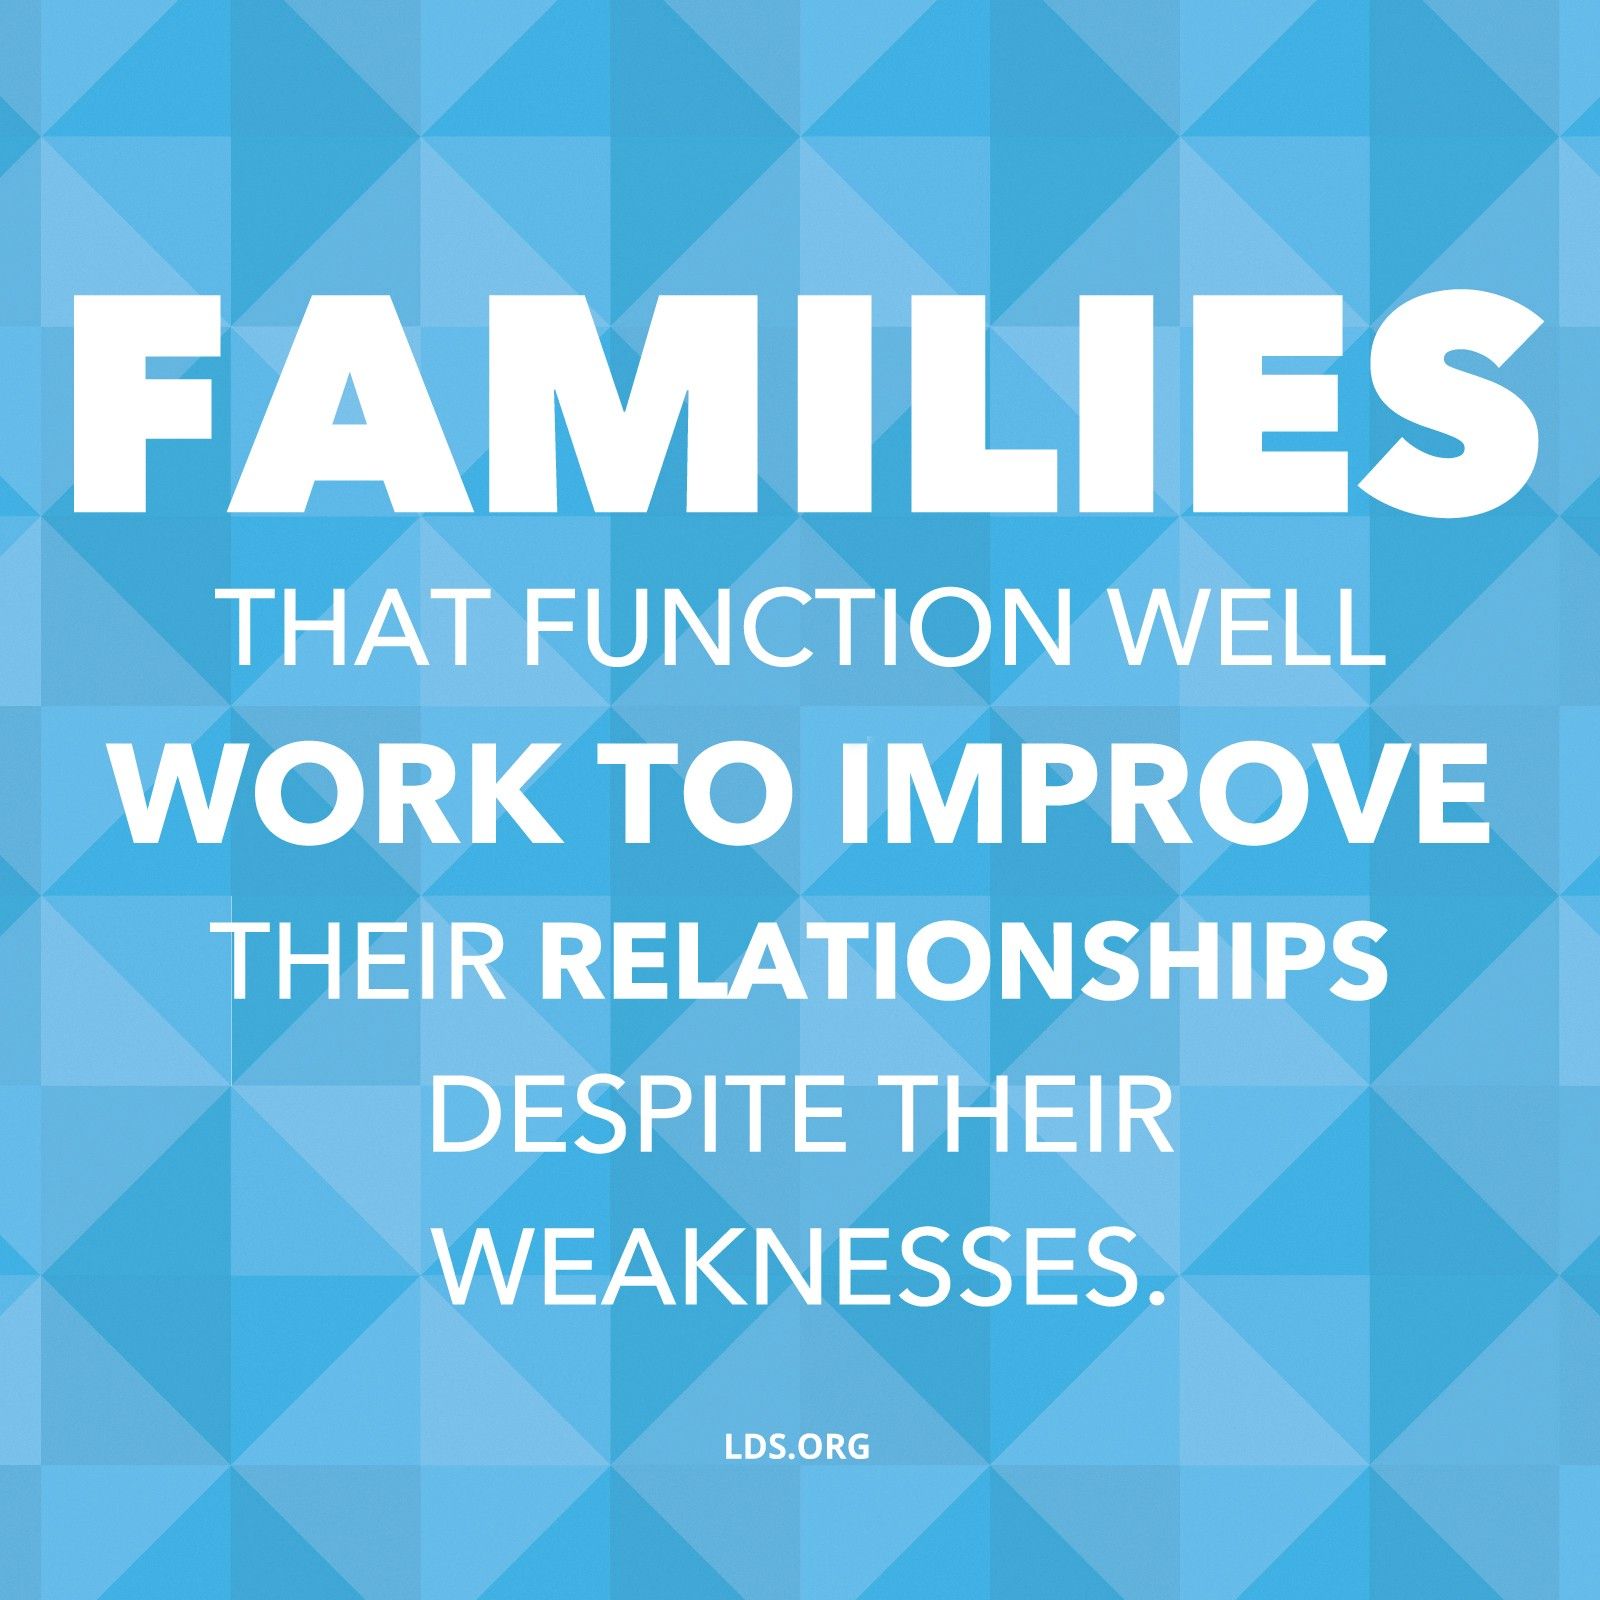 “Families that function well work to improve their relationships despite their weaknesses.”—James D. MacArthur, “The Functional Family”